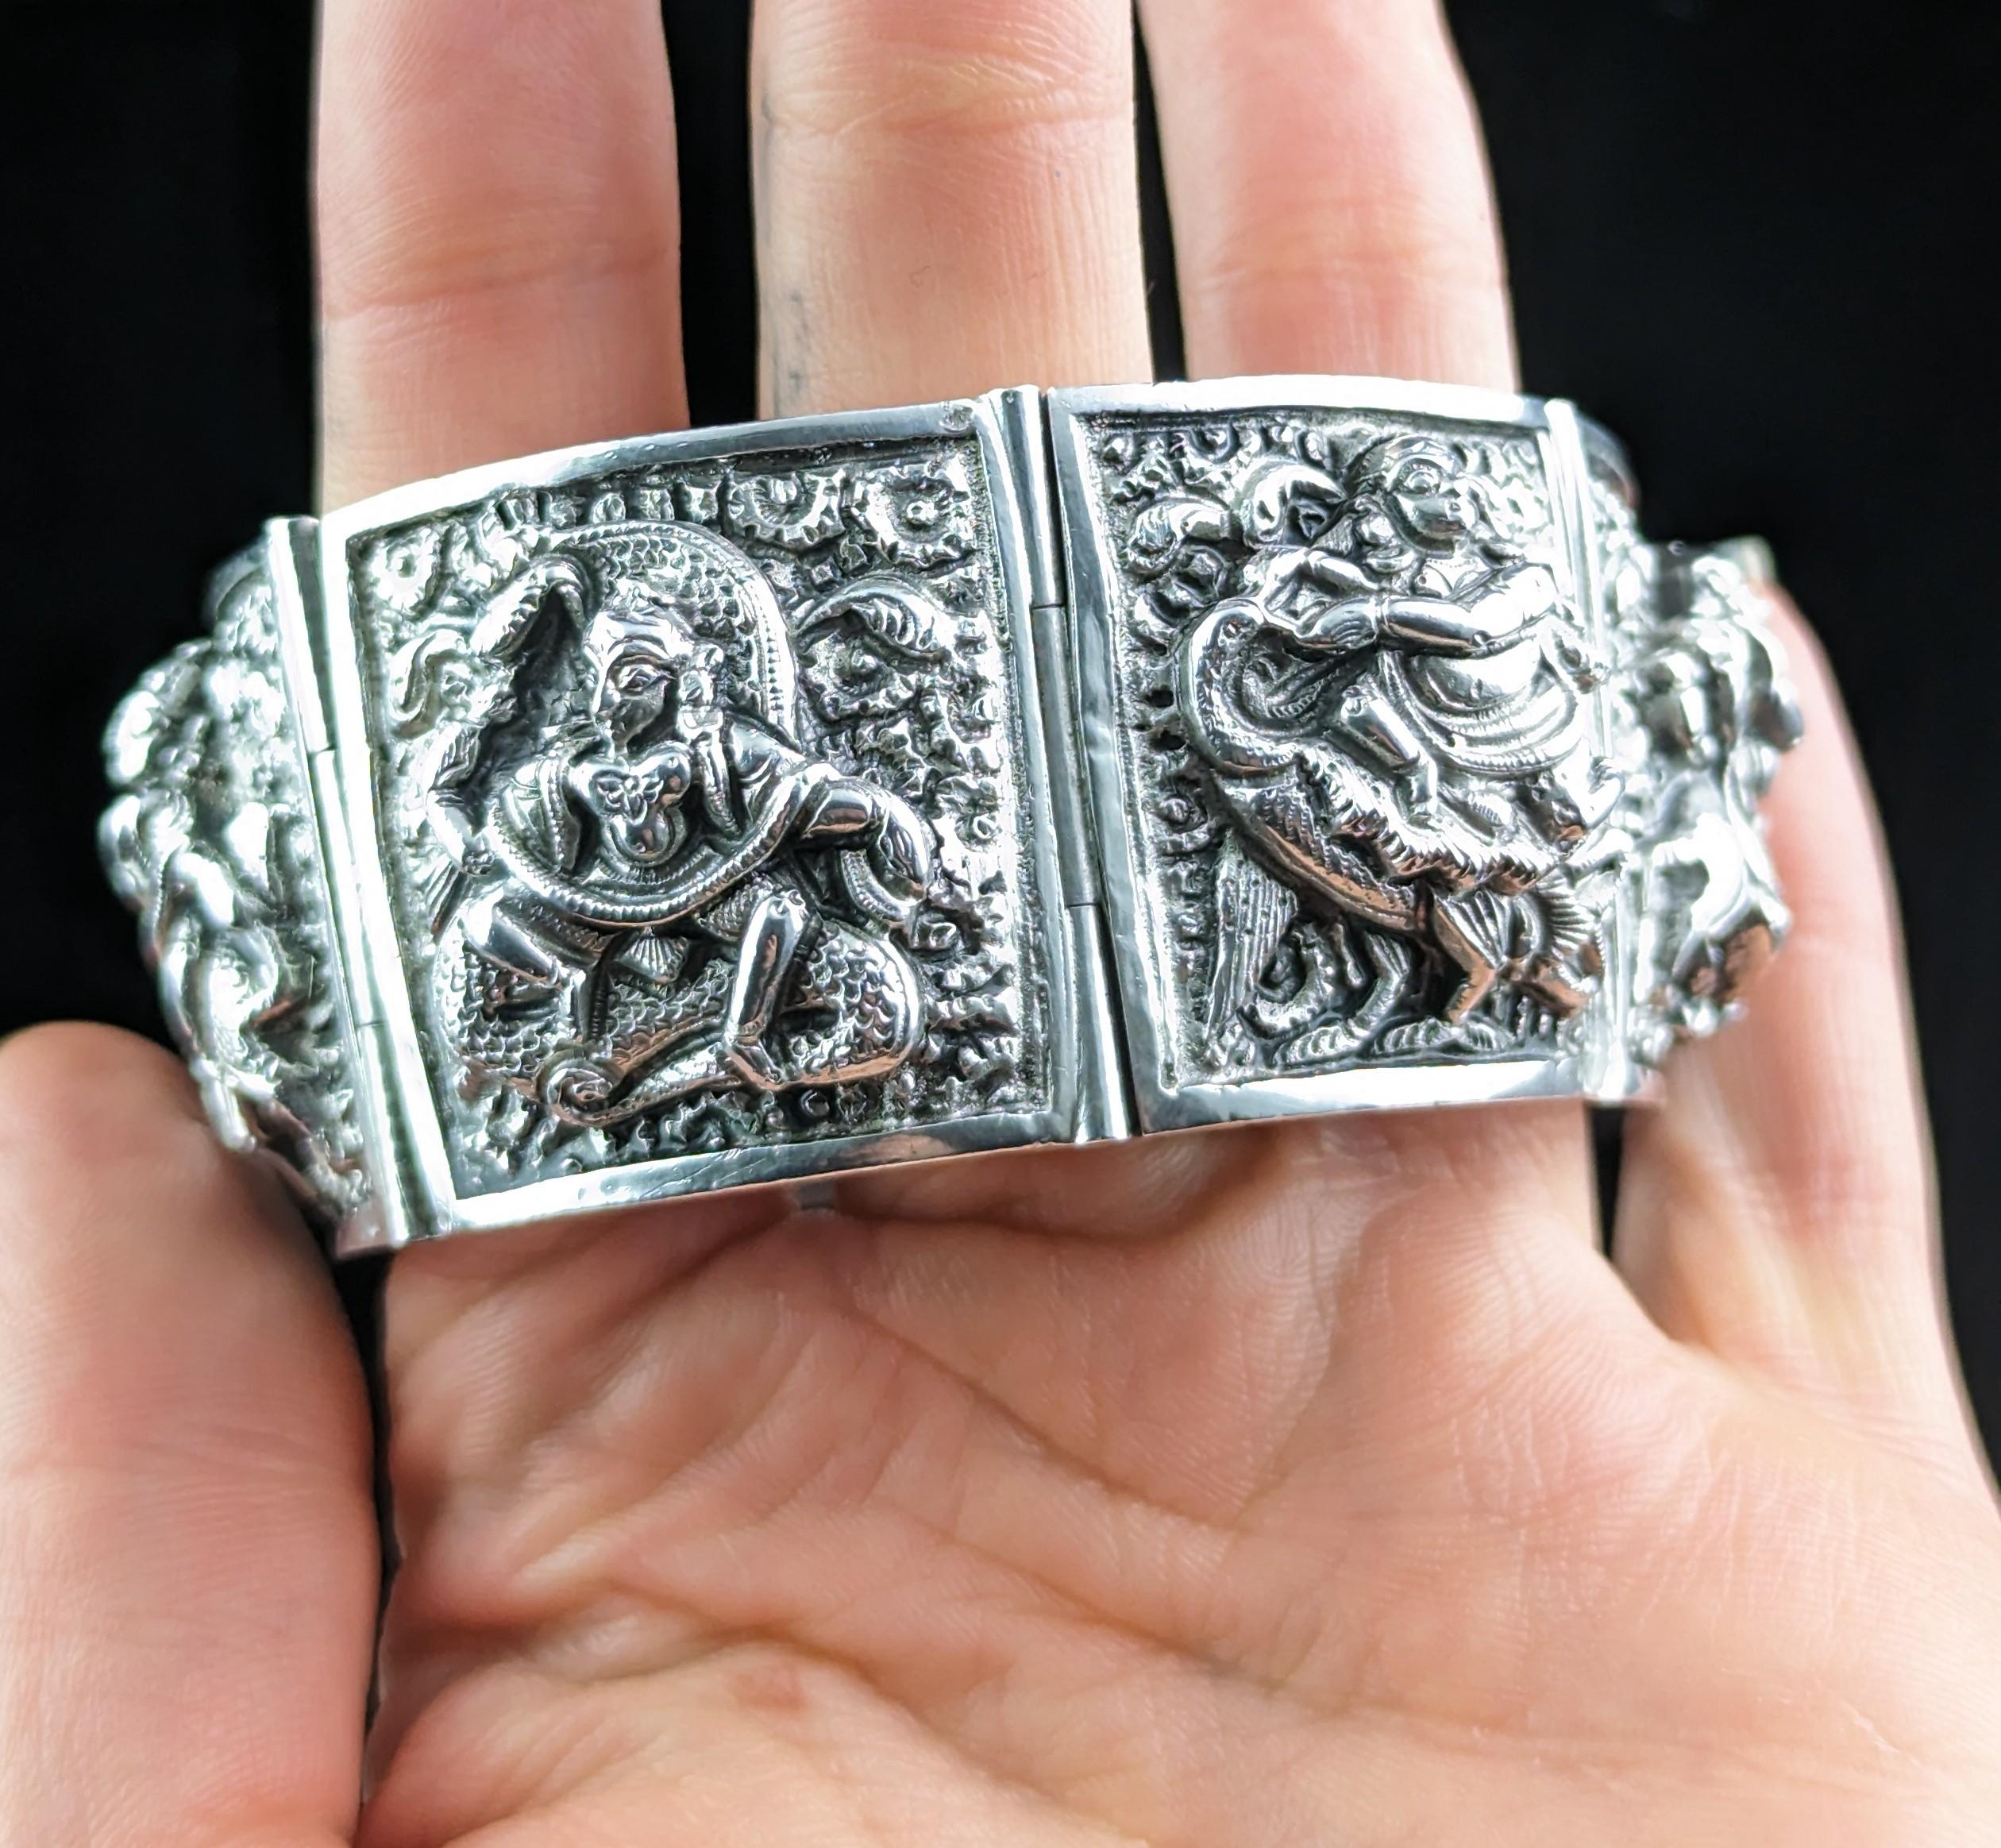 You can't help but be enchanted with this gorgeous, rare antique, Victorian era, sterling silver panel bracelet.

It is very heavy and chunky, made up from individual panels each decorated with the most fantastic high relief designs of Buddhist